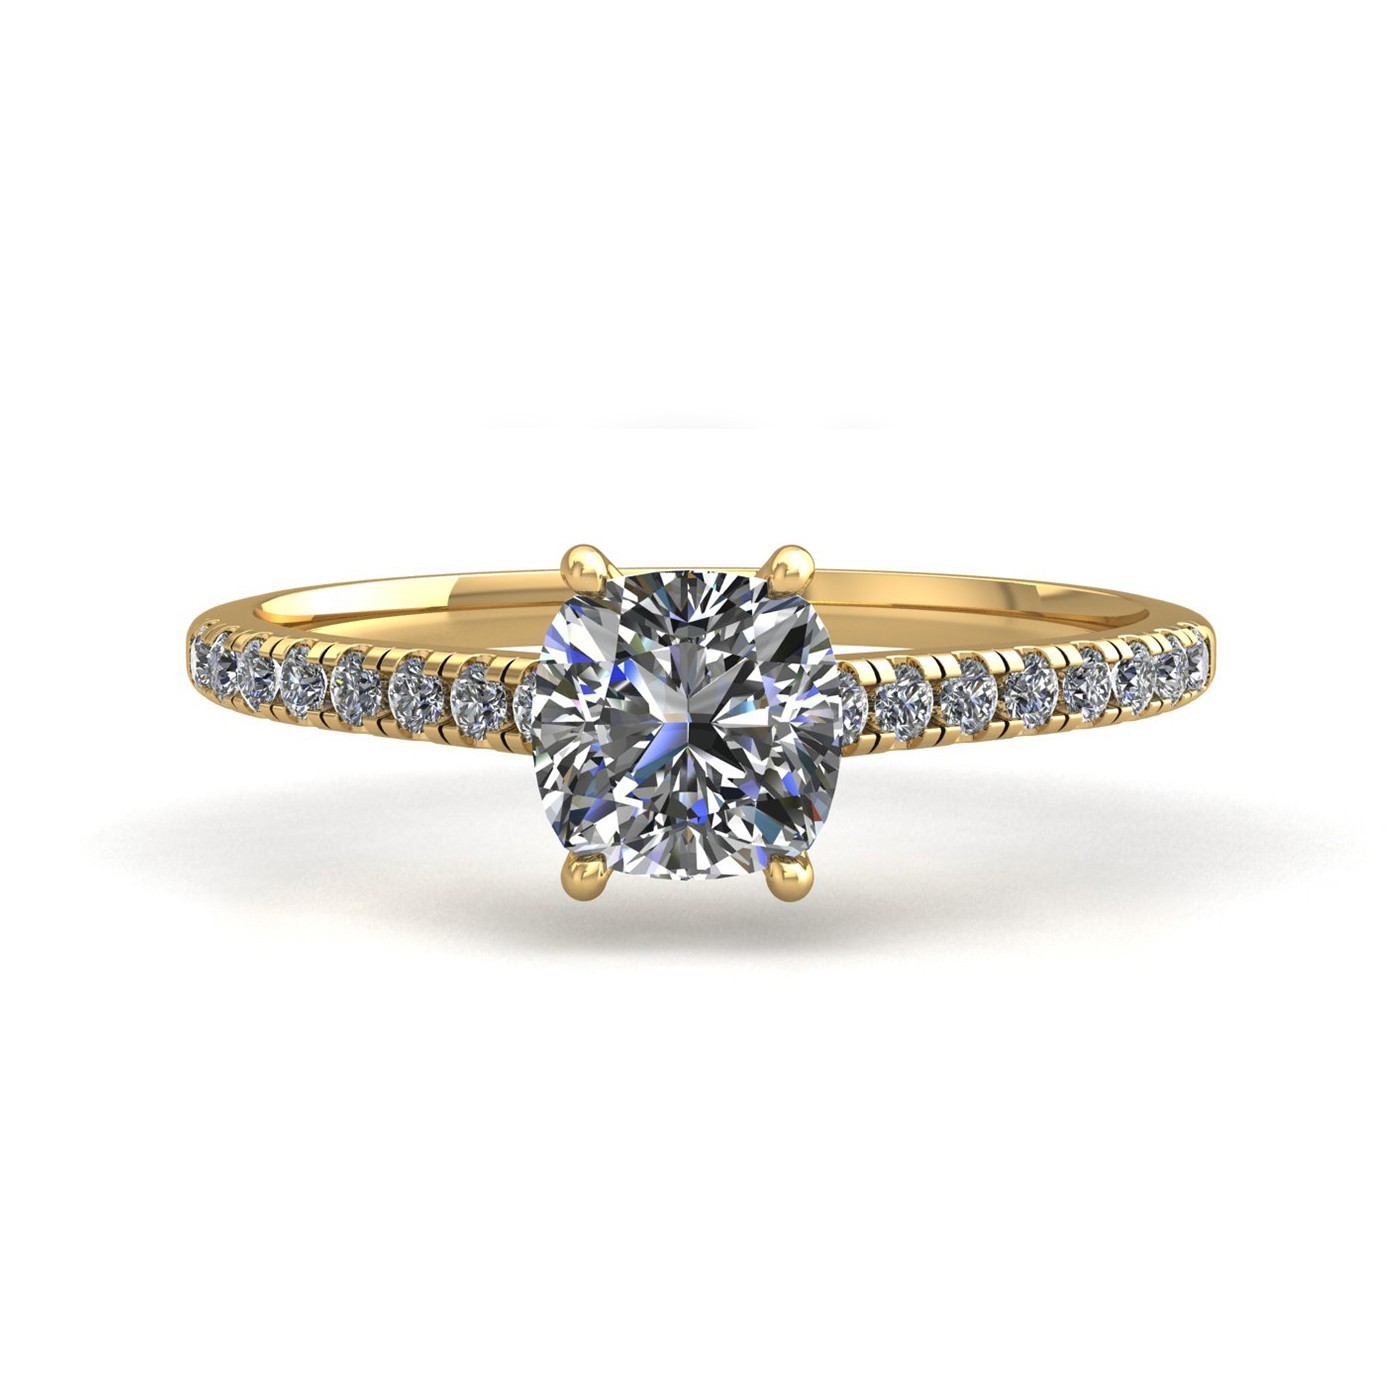 18k yellow gold  0,30 ct 4 prongs cushion cut diamond engagement ring with whisper thin pavÉ set band Photos & images